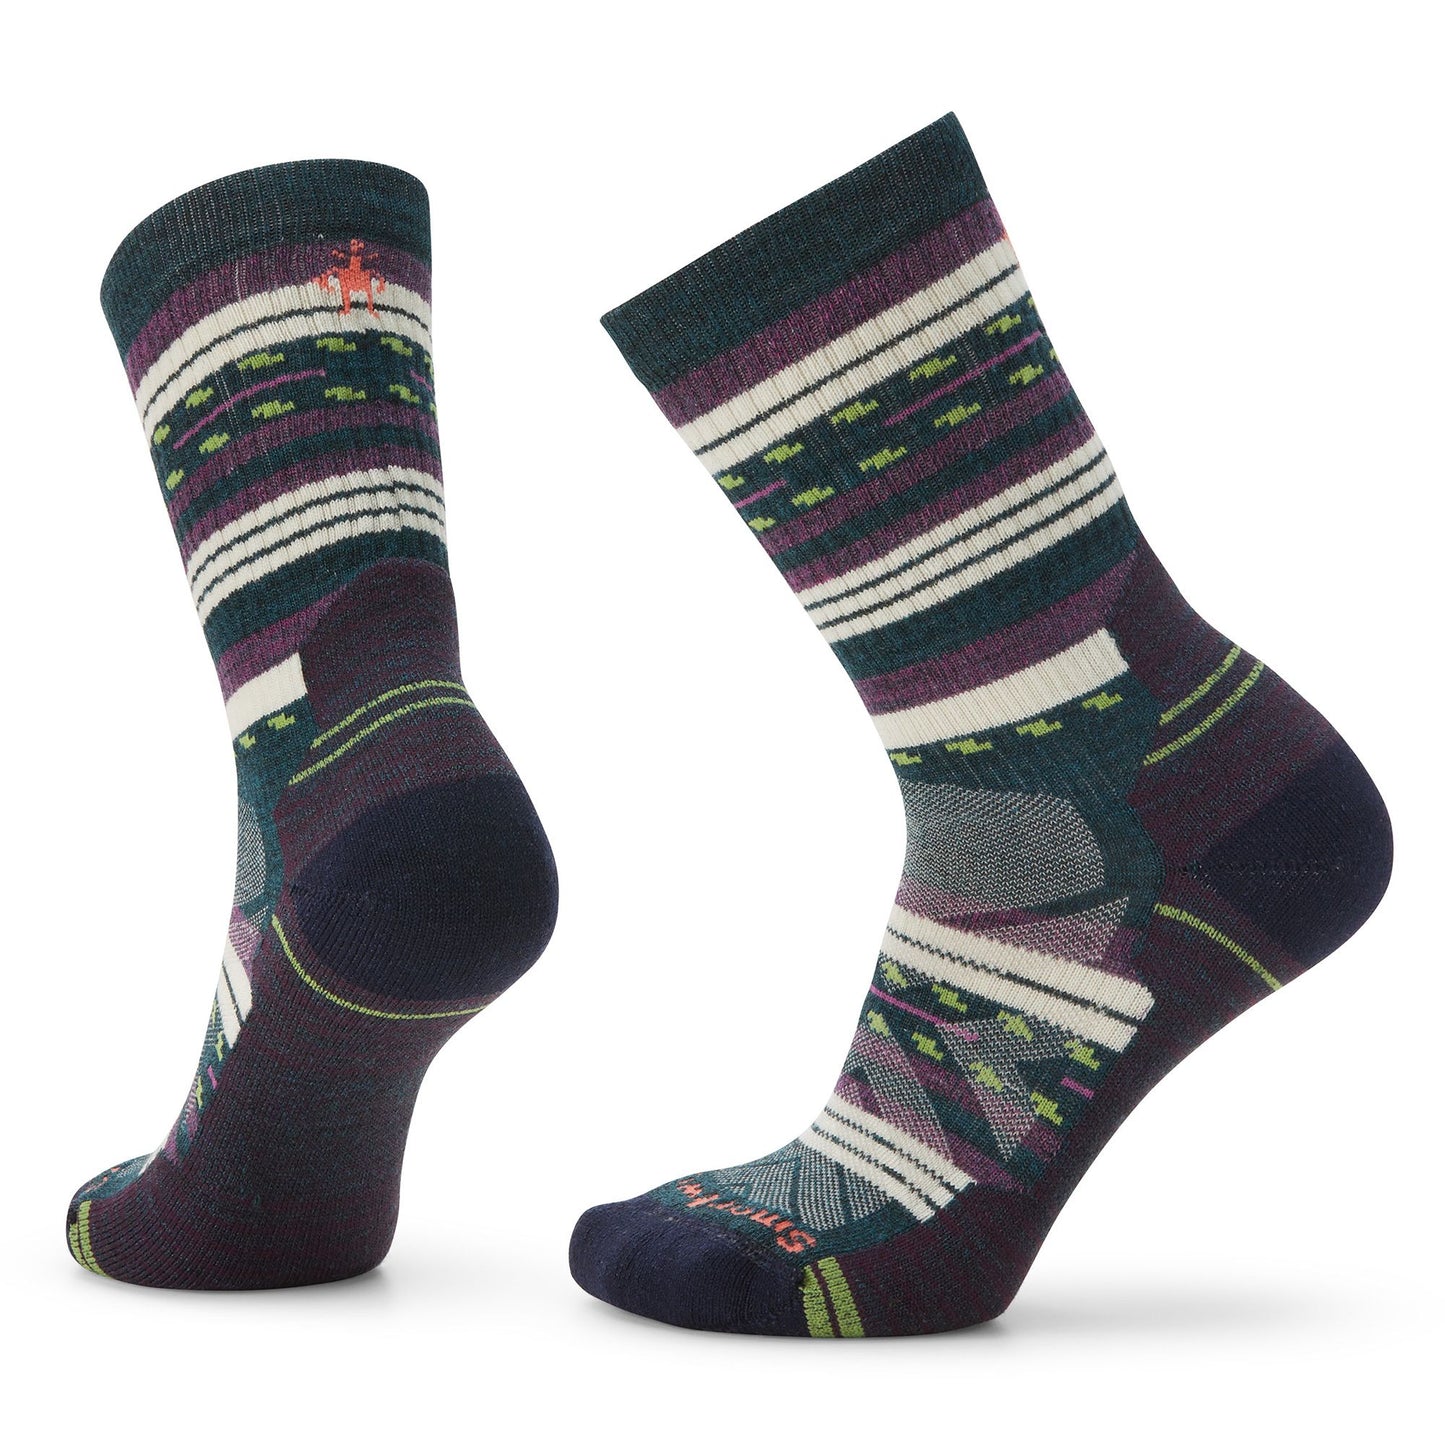 SMARTWOOL-F-CHAUSSETTE HIKE COUSSIN MINCE